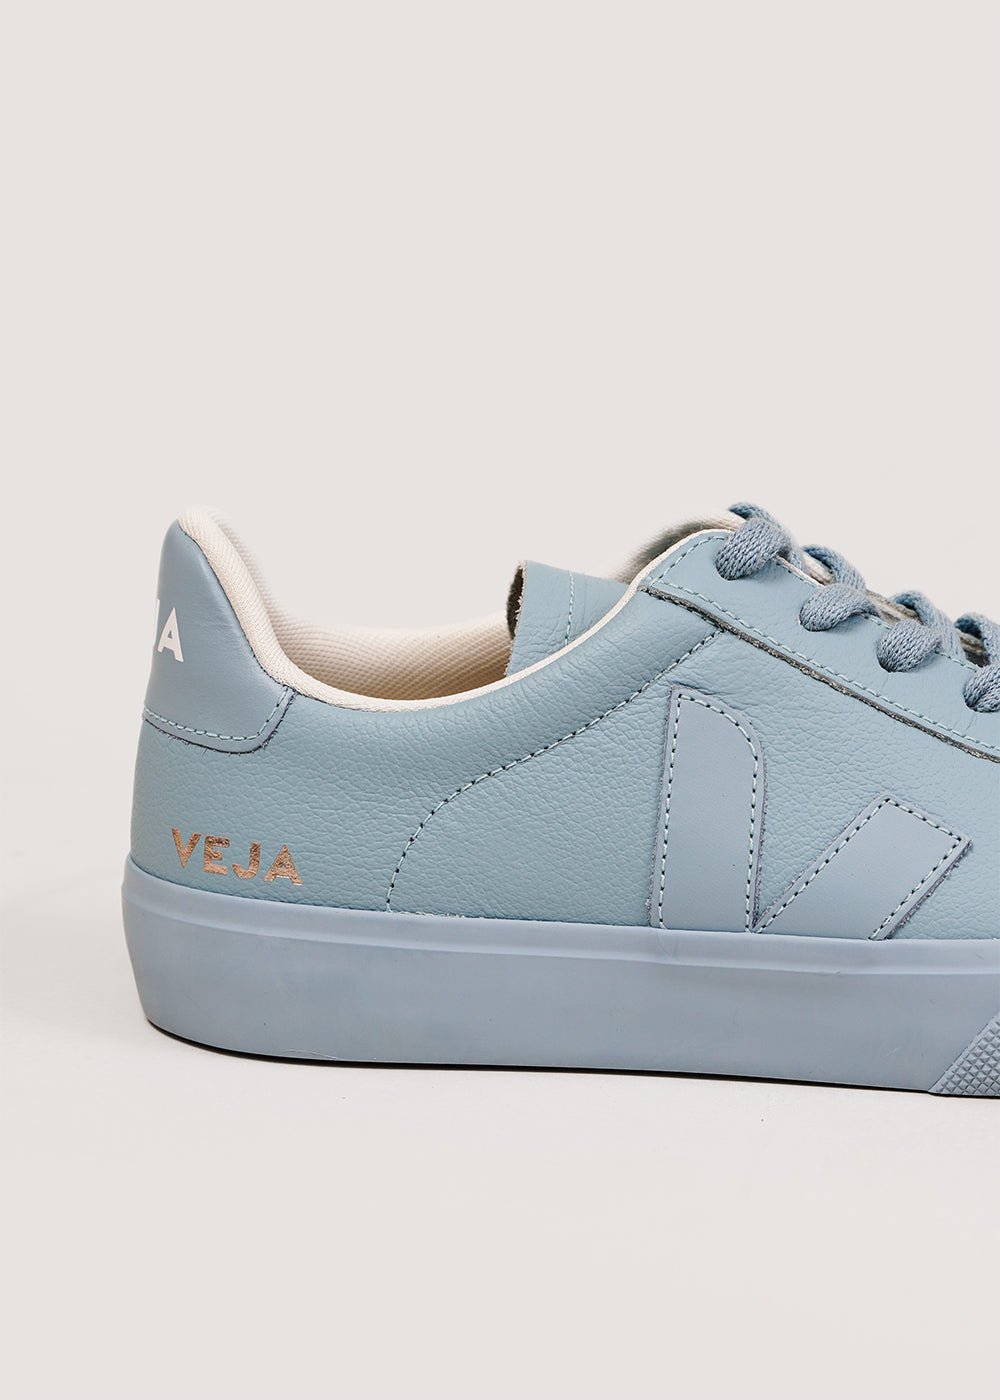 Veja Full Steel Campo Sneakers - New Classics Studios Sustainable Ethical Fashion Canada